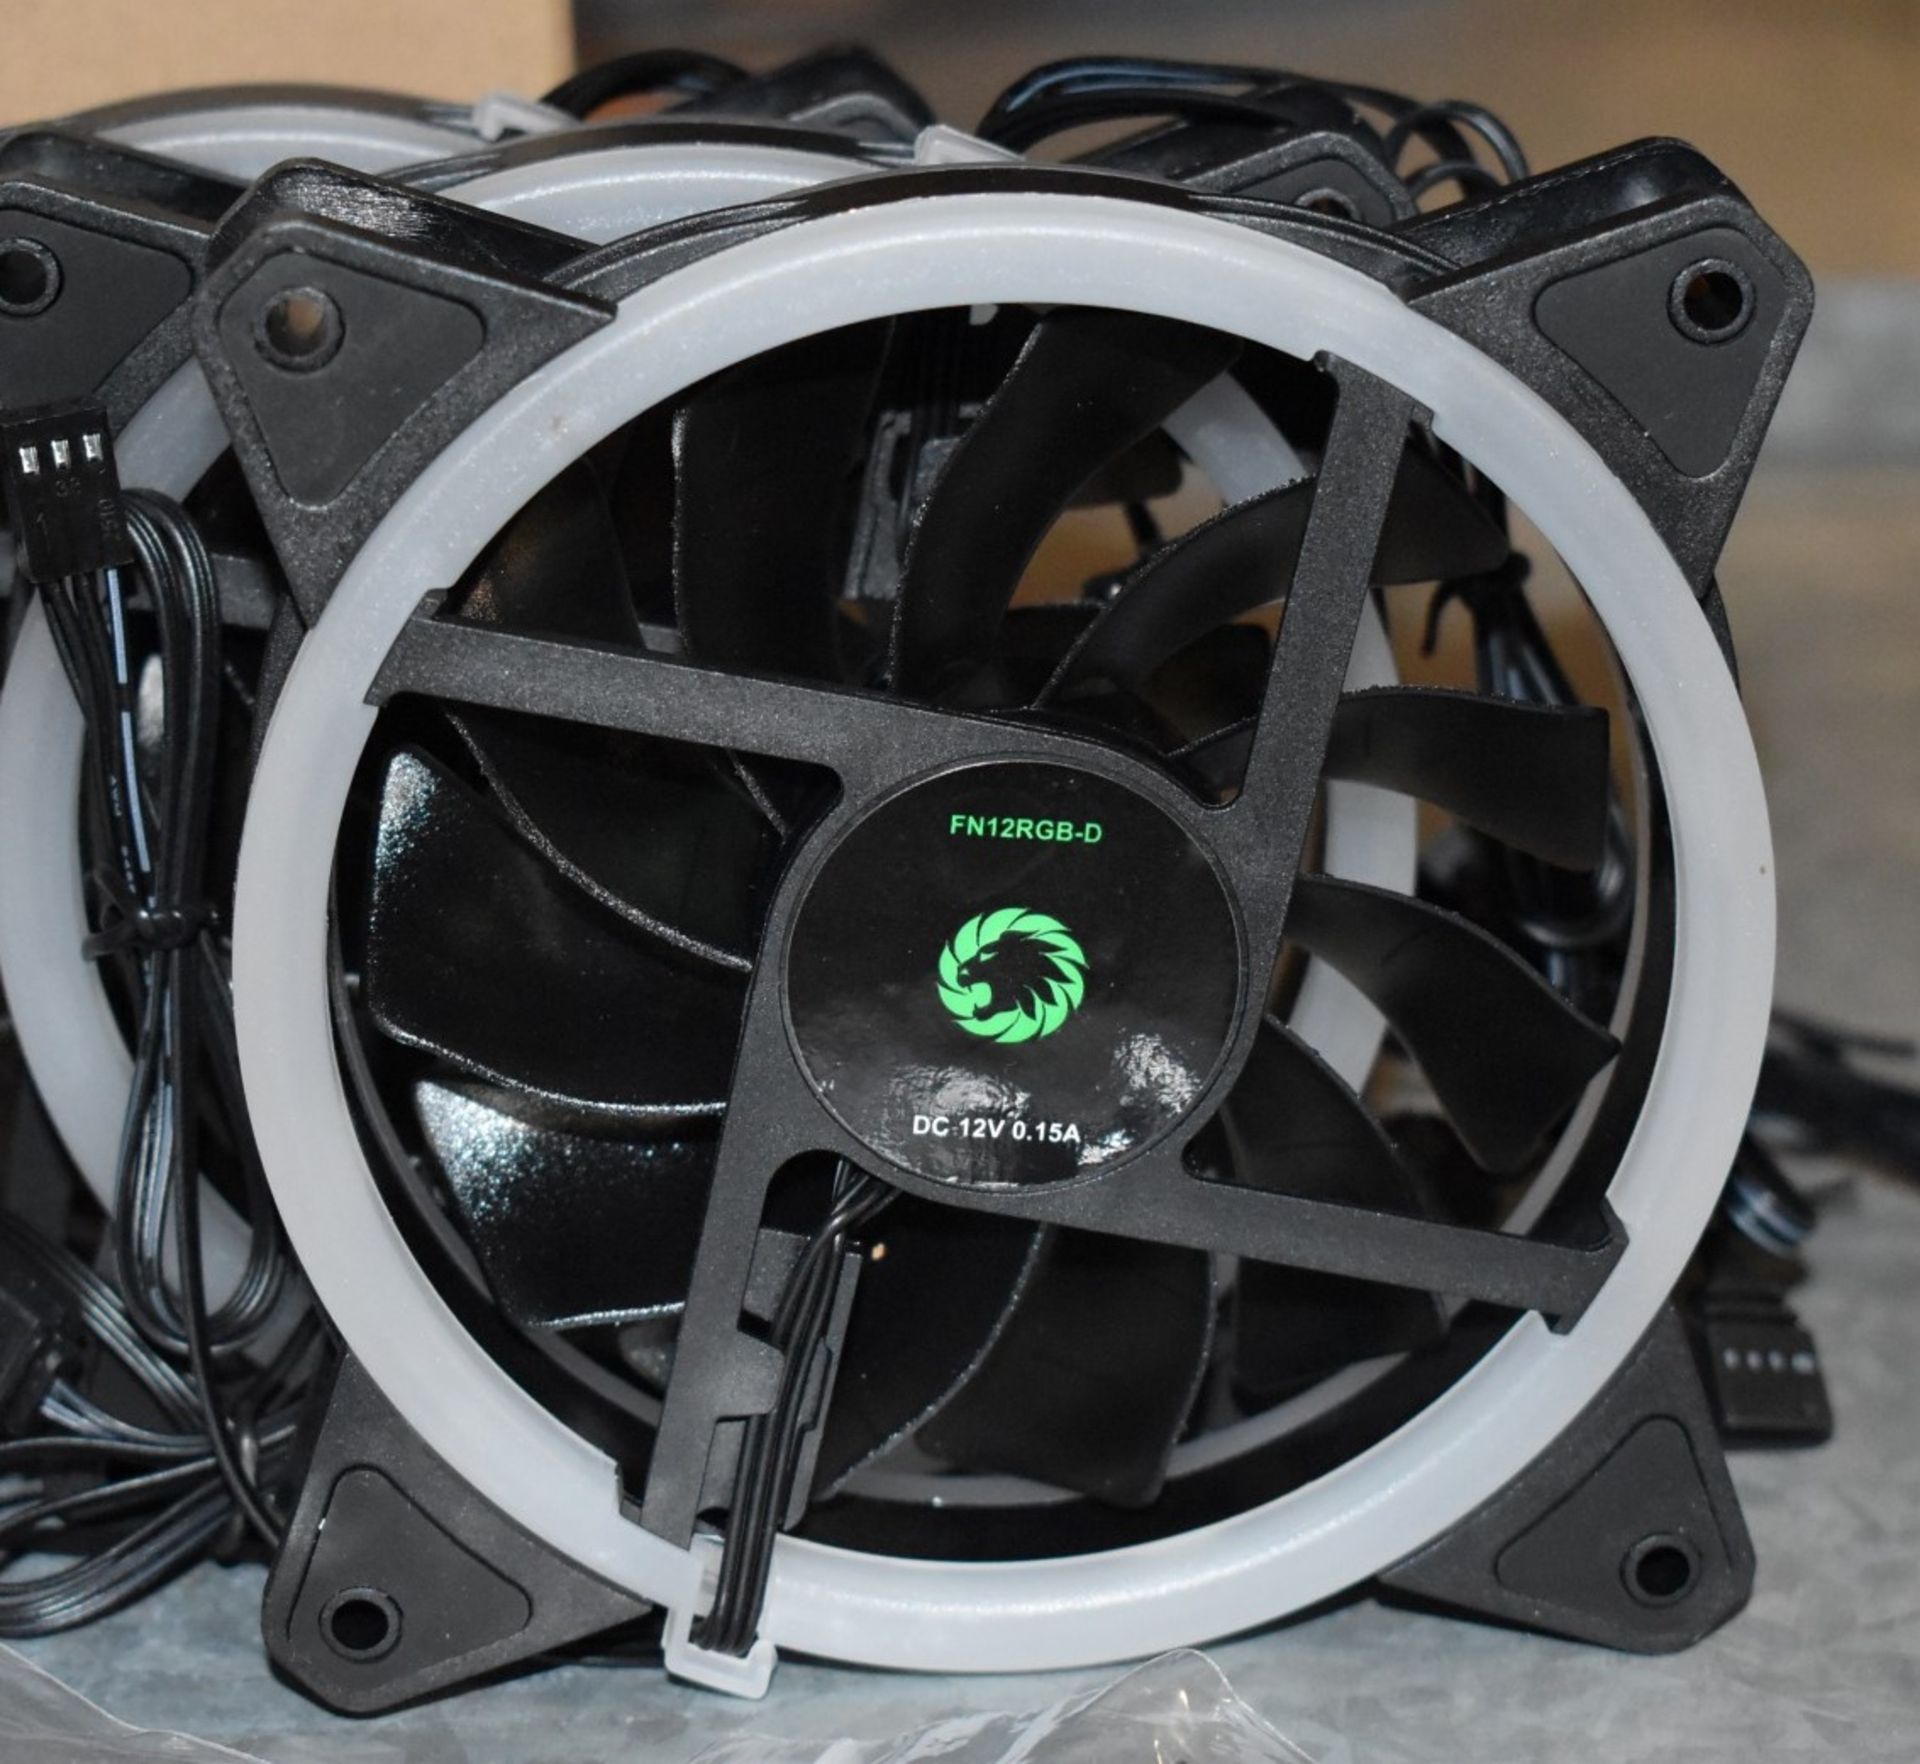 30 x GameMax LED Fan Packs For PC Gaming Cases - Each Packs Include 3 x 120mm LED Case Fans, - Image 3 of 8